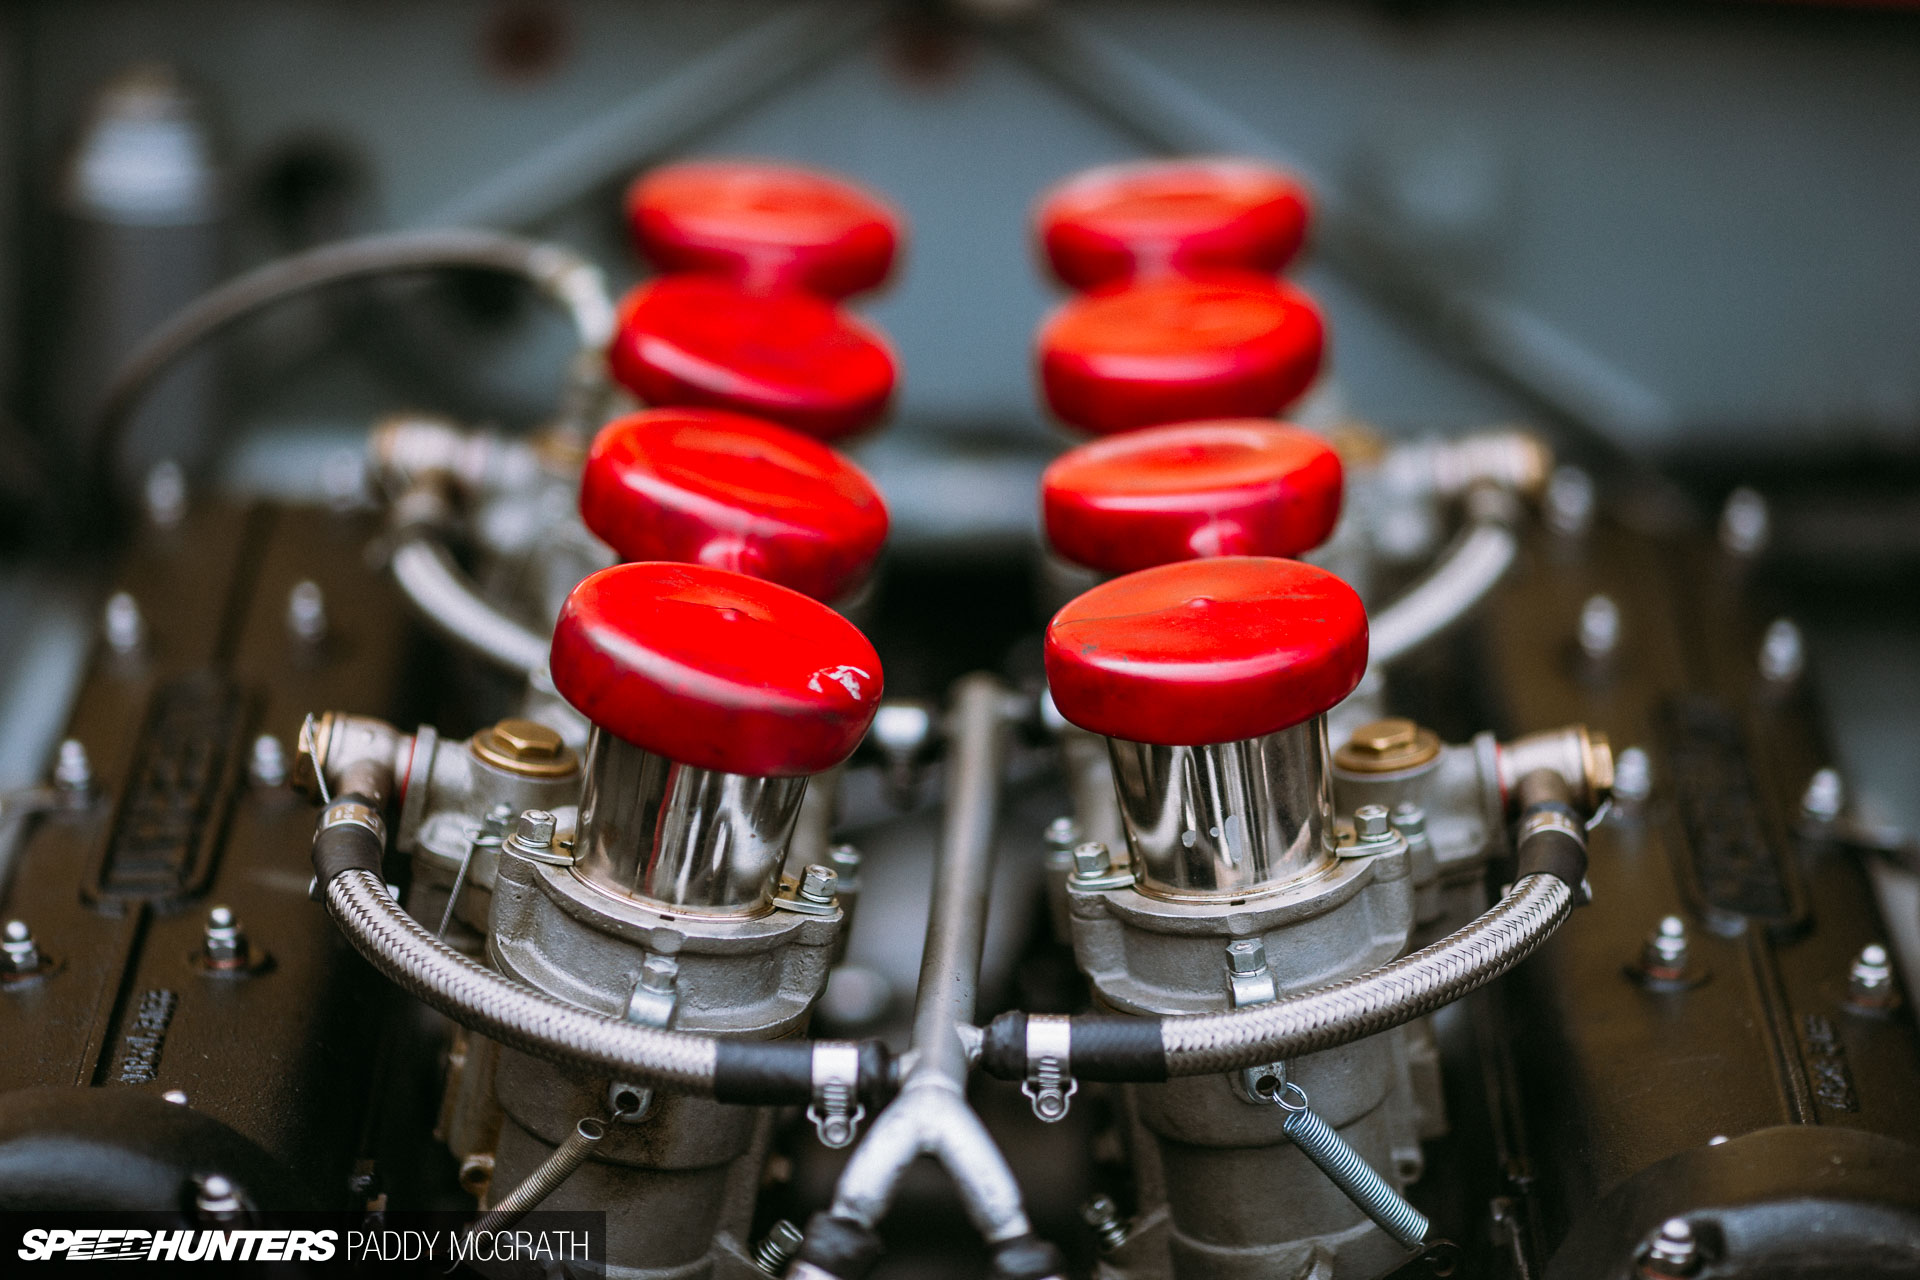 2019-Goodwood-77MM-Speedhunters-by-Paddy